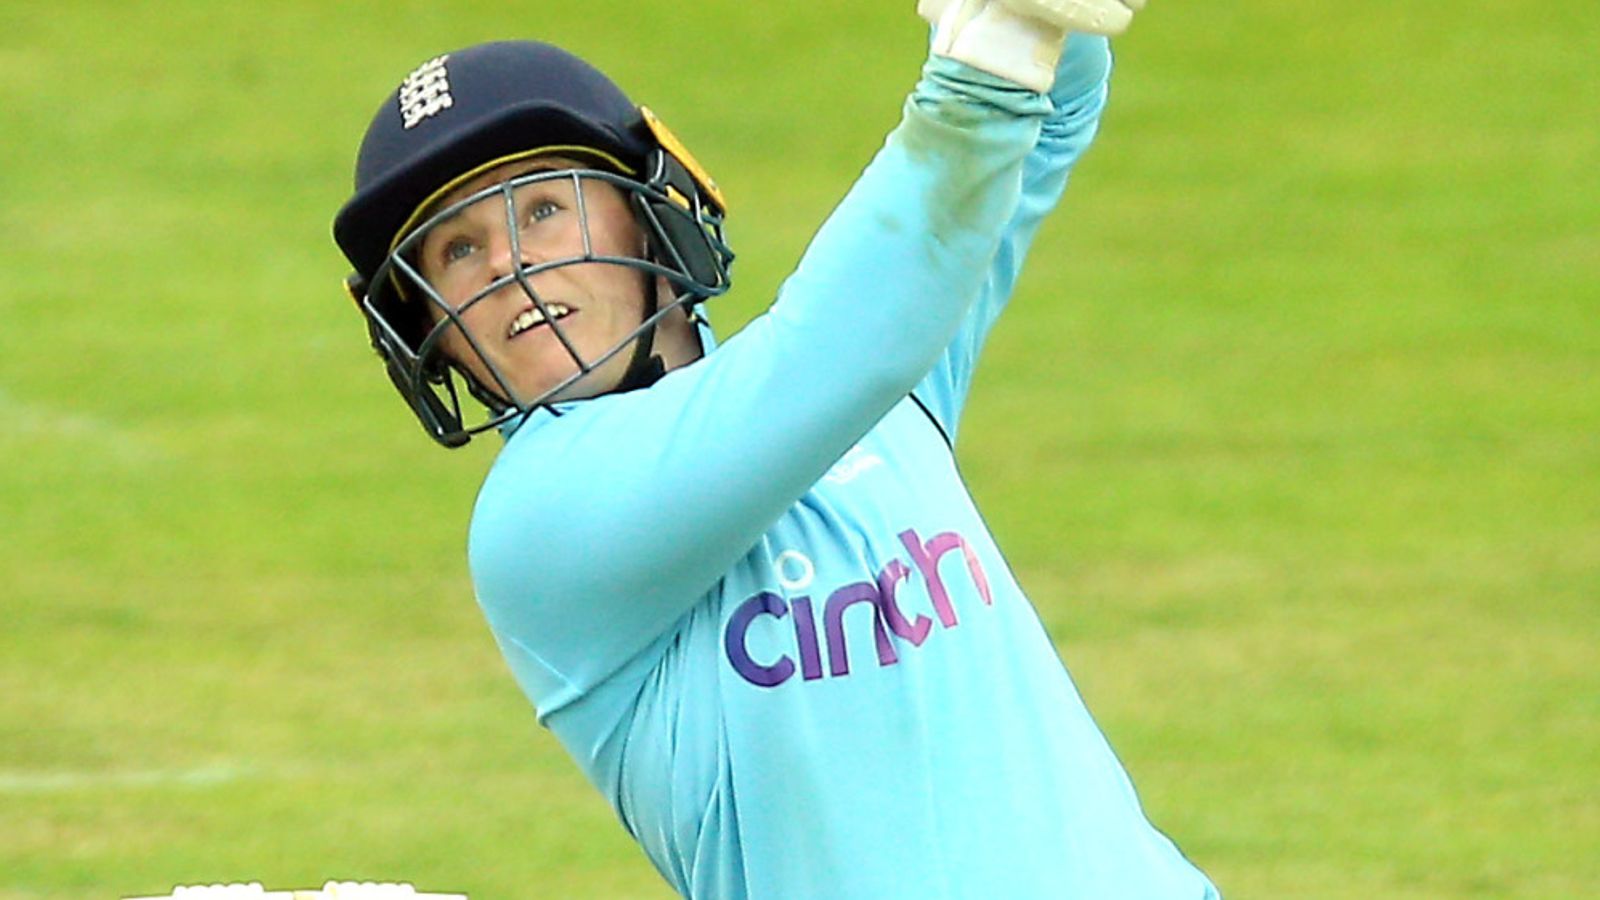 England’s Tammy Beaumont says ‘ruthless and relentless’ mindset behind superb ODI batting form